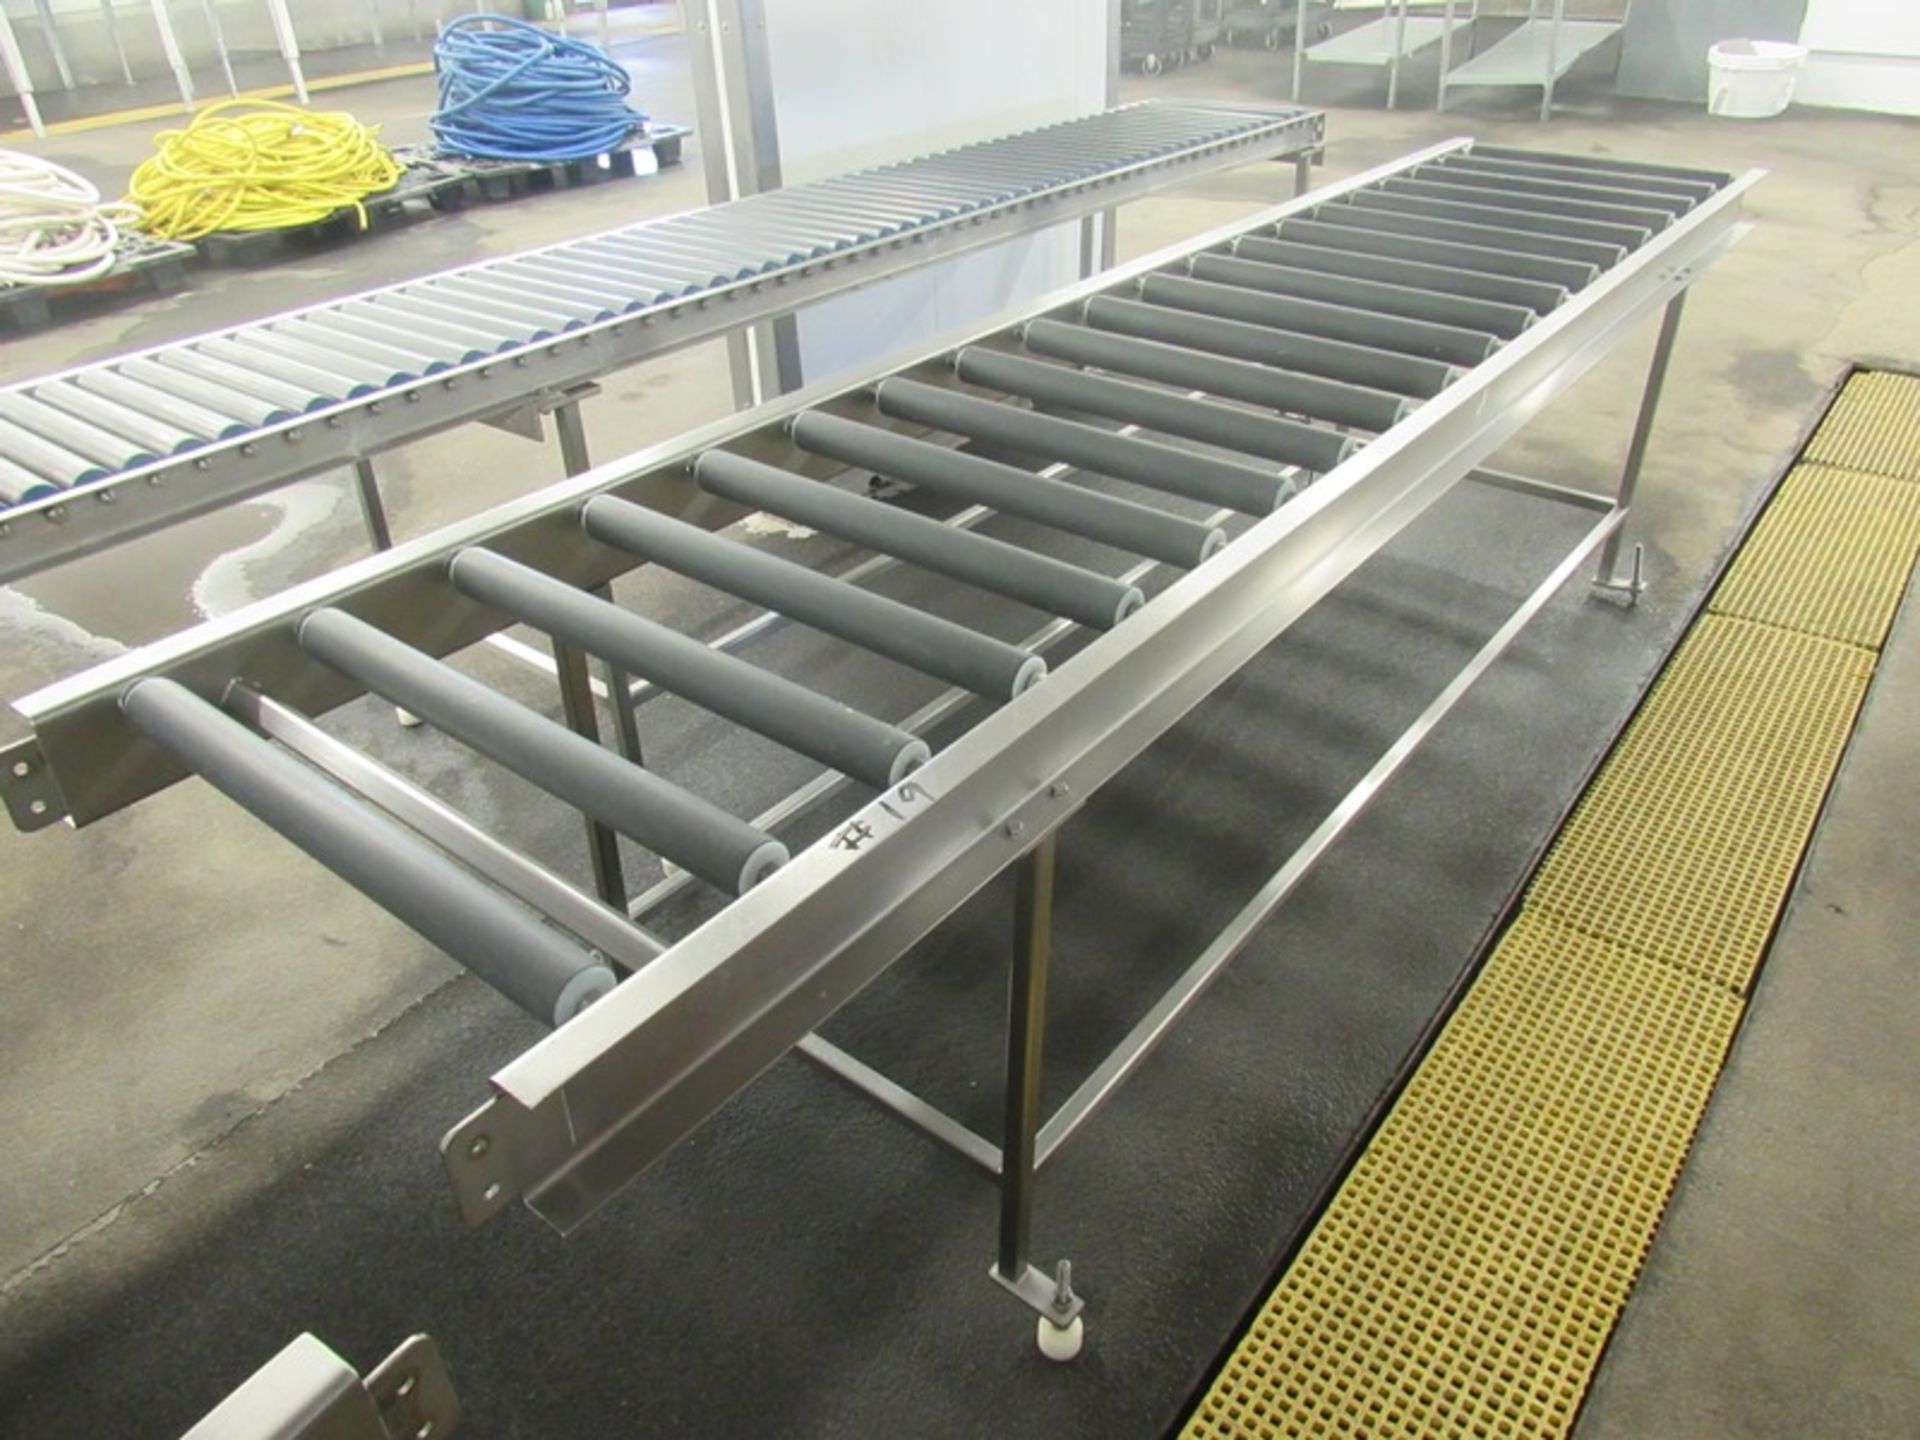 Lot of (2) Stainless Steel Frame Roller Conveyors, (2) 22" wide rollers by 10' long X 33" tall, ( - Image 2 of 3